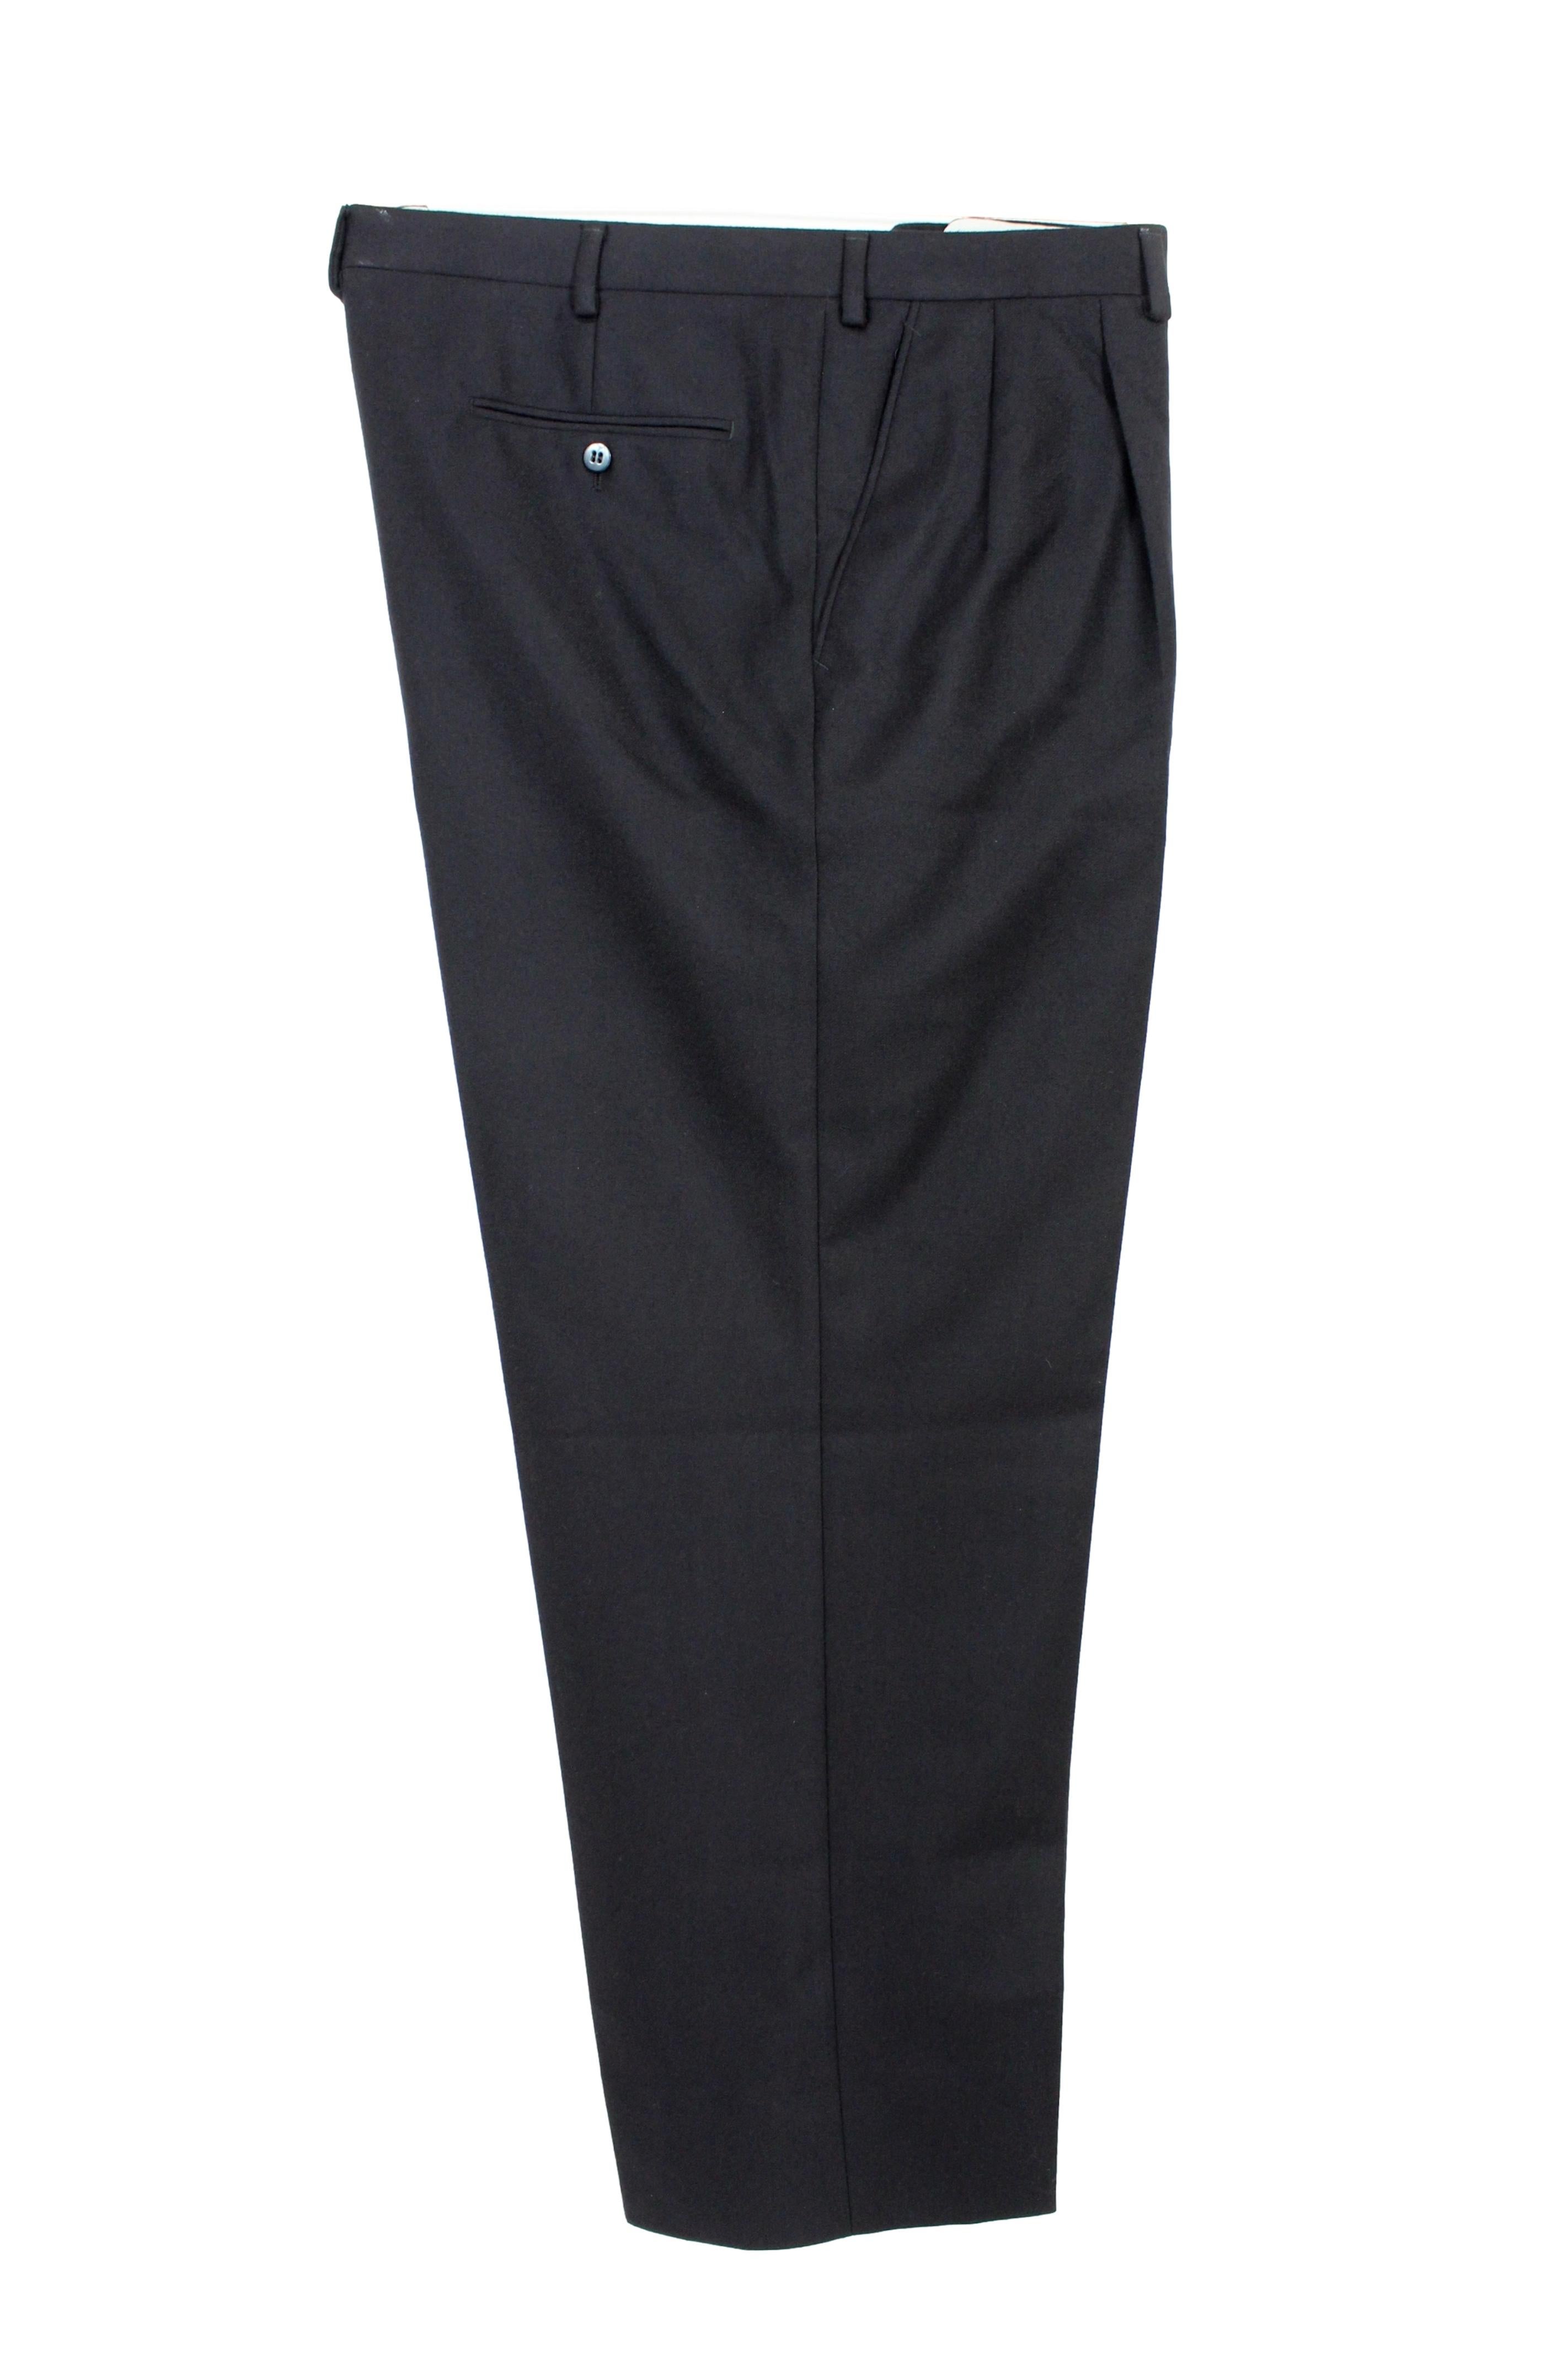 Brioni vintage 90s trousers. Classic trousers, black color, 5 pockets. 100% wool fabric. Made in Italy, New without tag, coming from stock. The trousers have probably been shortened and the sill inserted.

Size: 60 Reg It 50 Us 50 uk

Waist: 52